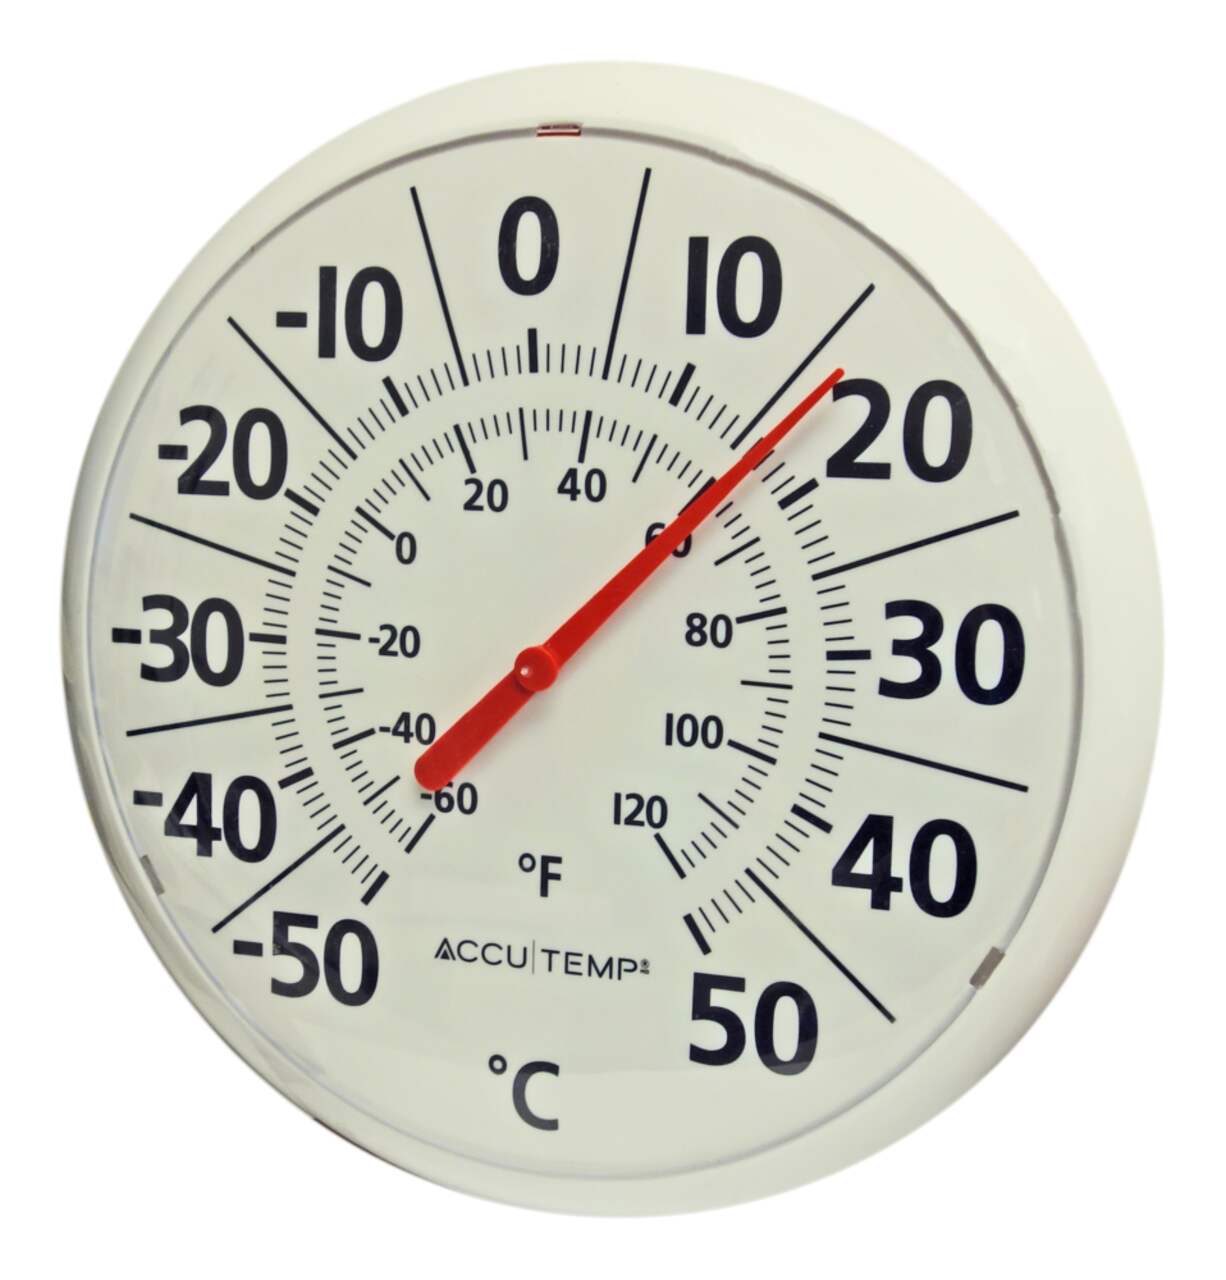 Where to place an outside thermometer